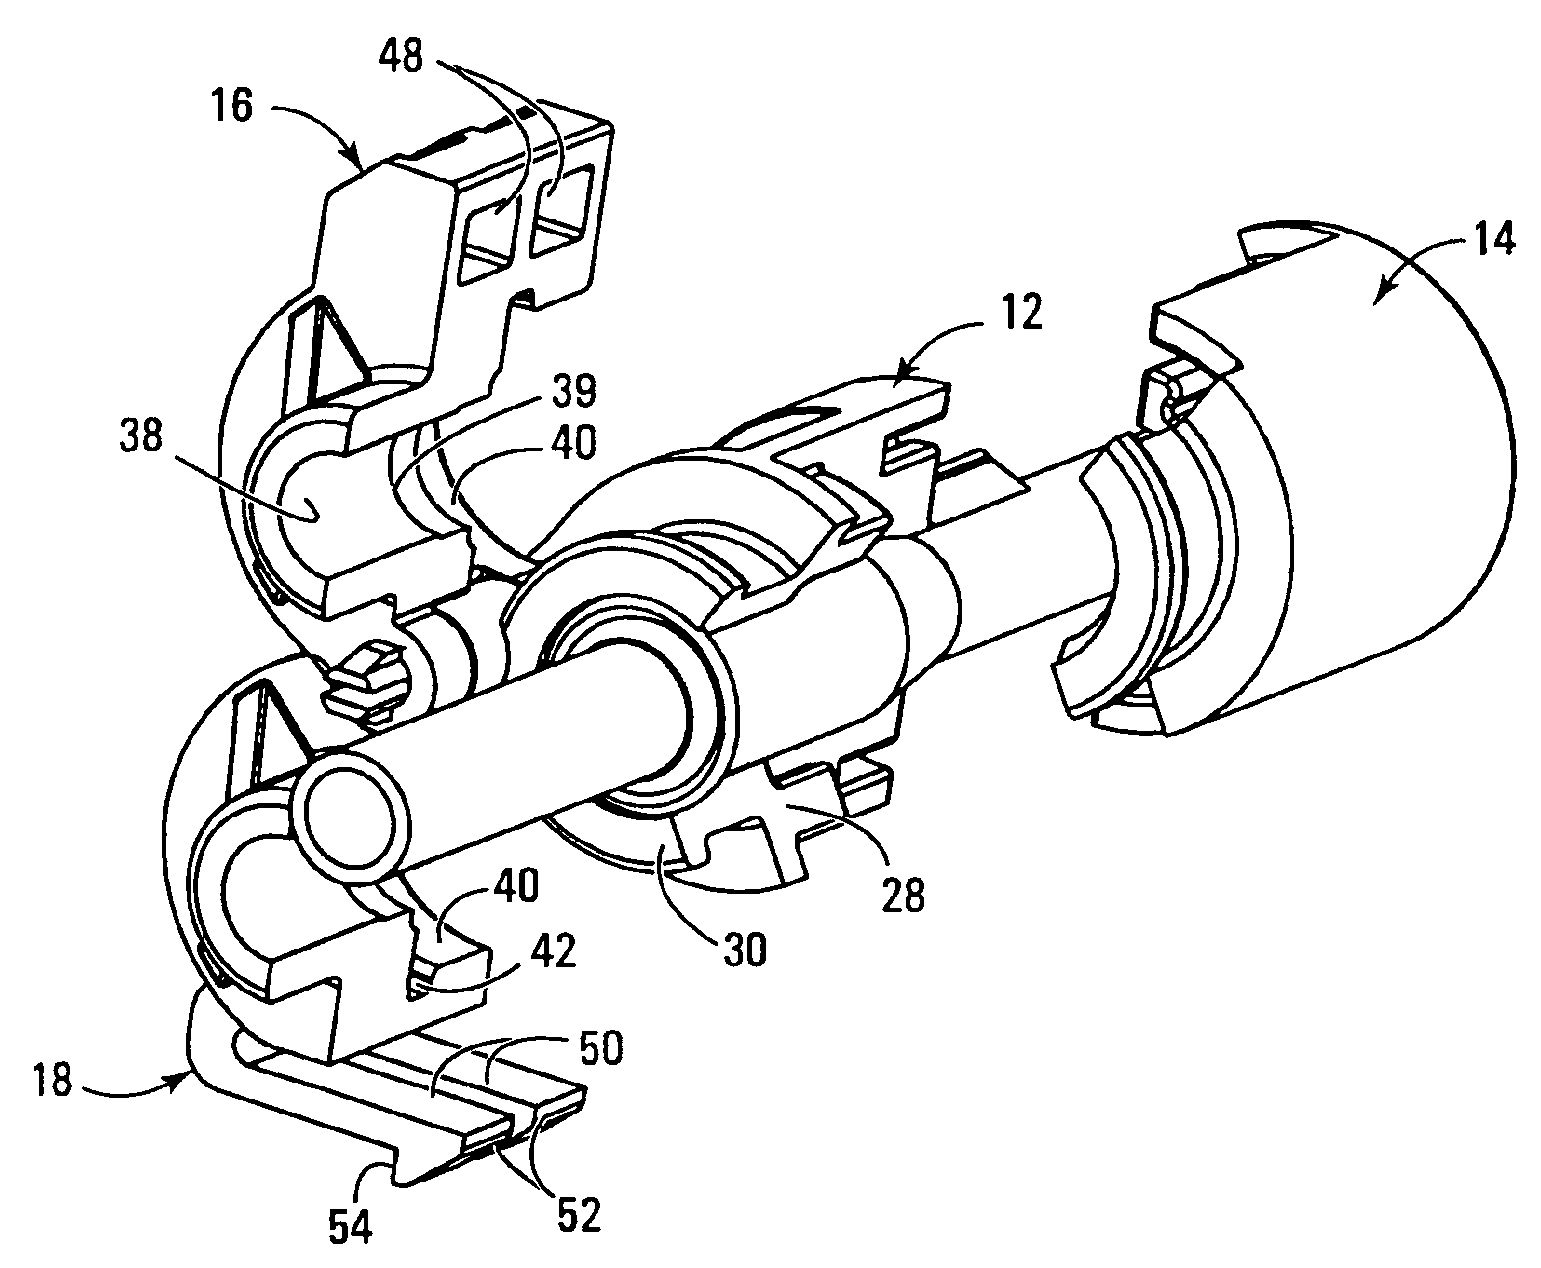 Coupling for coaxial connection of fluid conduits